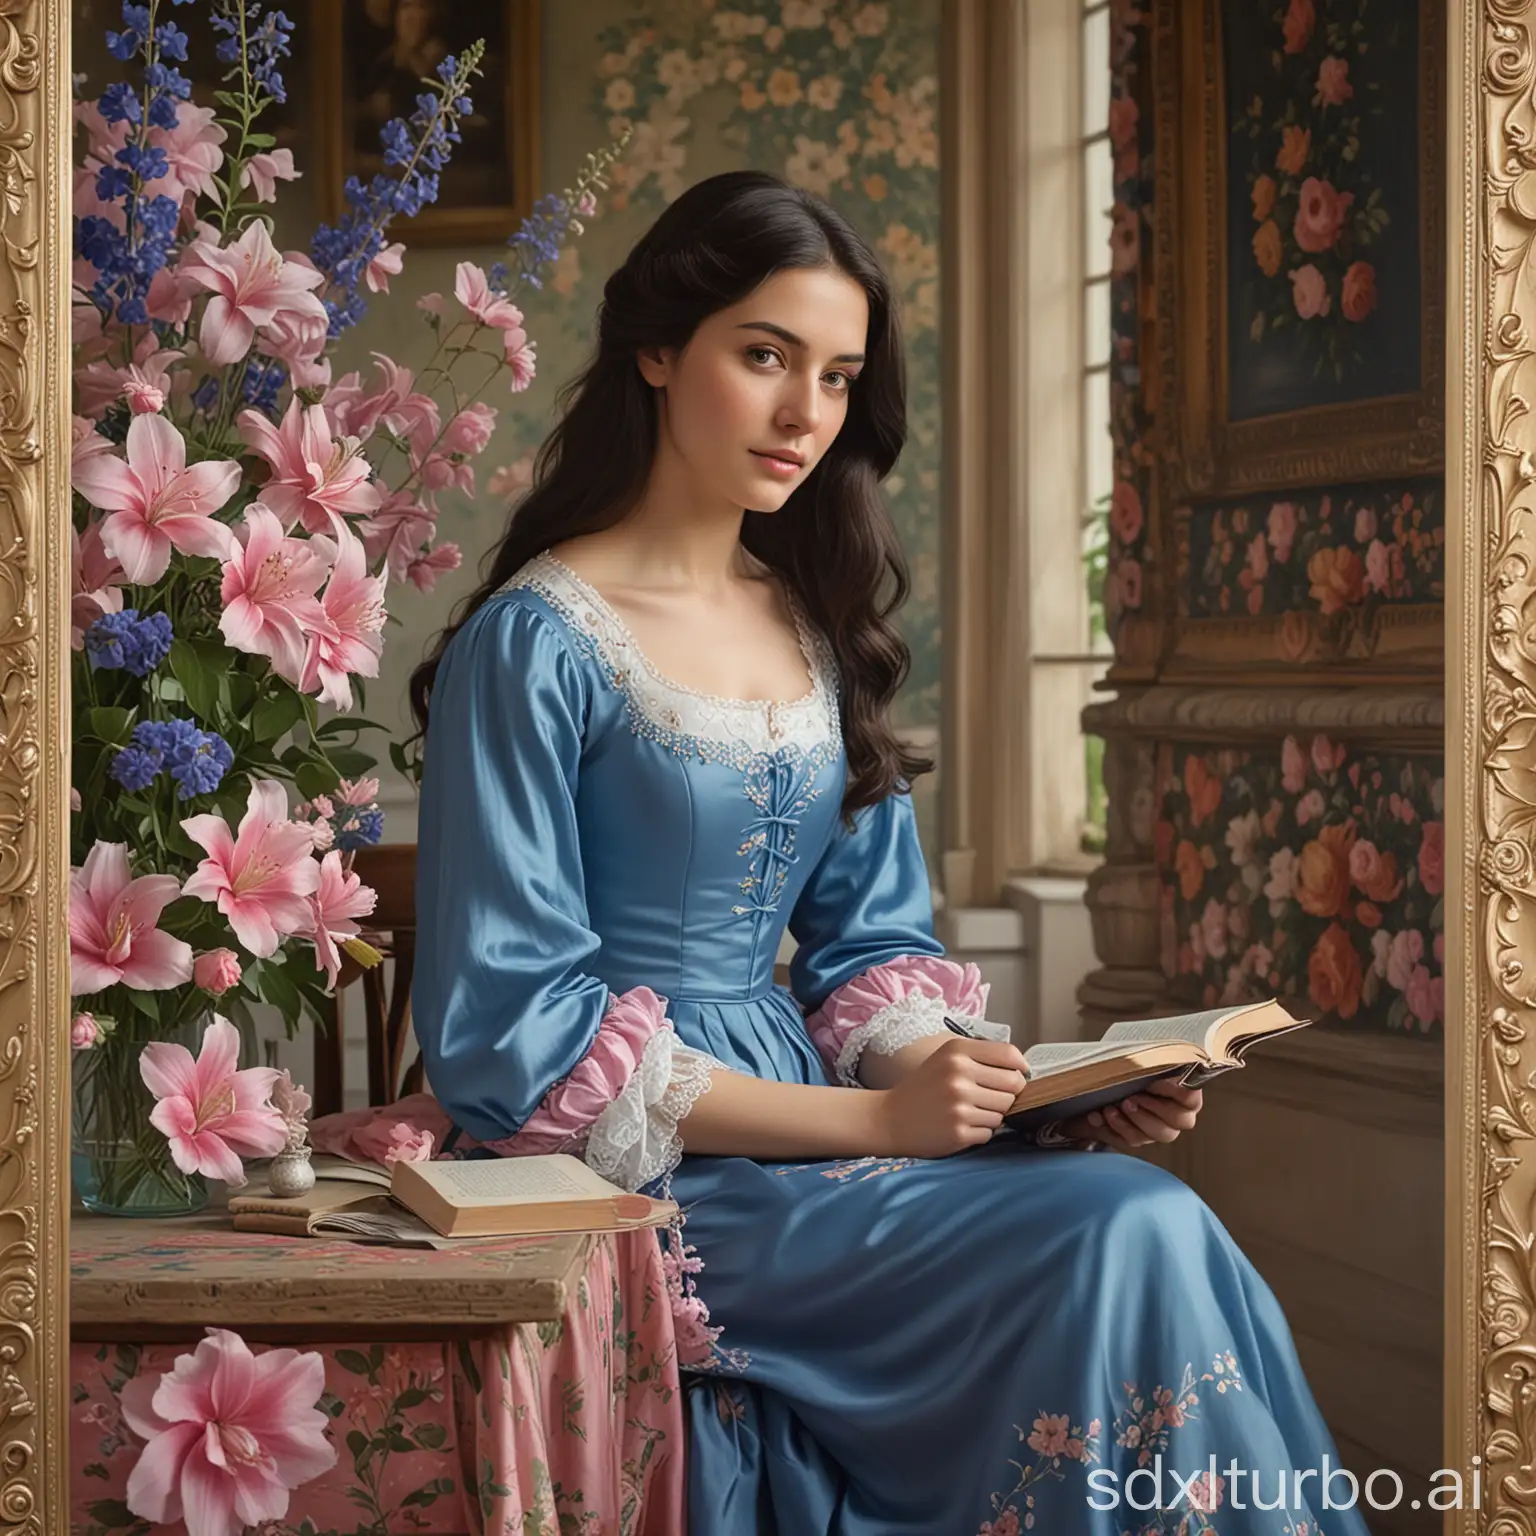 The image depicts a young woman with long, dark hair wearing a blue dress adorned with pink and white flowers. She is seated at a table, holding a book and a pen, suggesting she is engaged in reading or writing. The background features a floral arrangement, adding a touch of nature to the scene. The image is framed by a border, giving it a vintage or artistic feel.